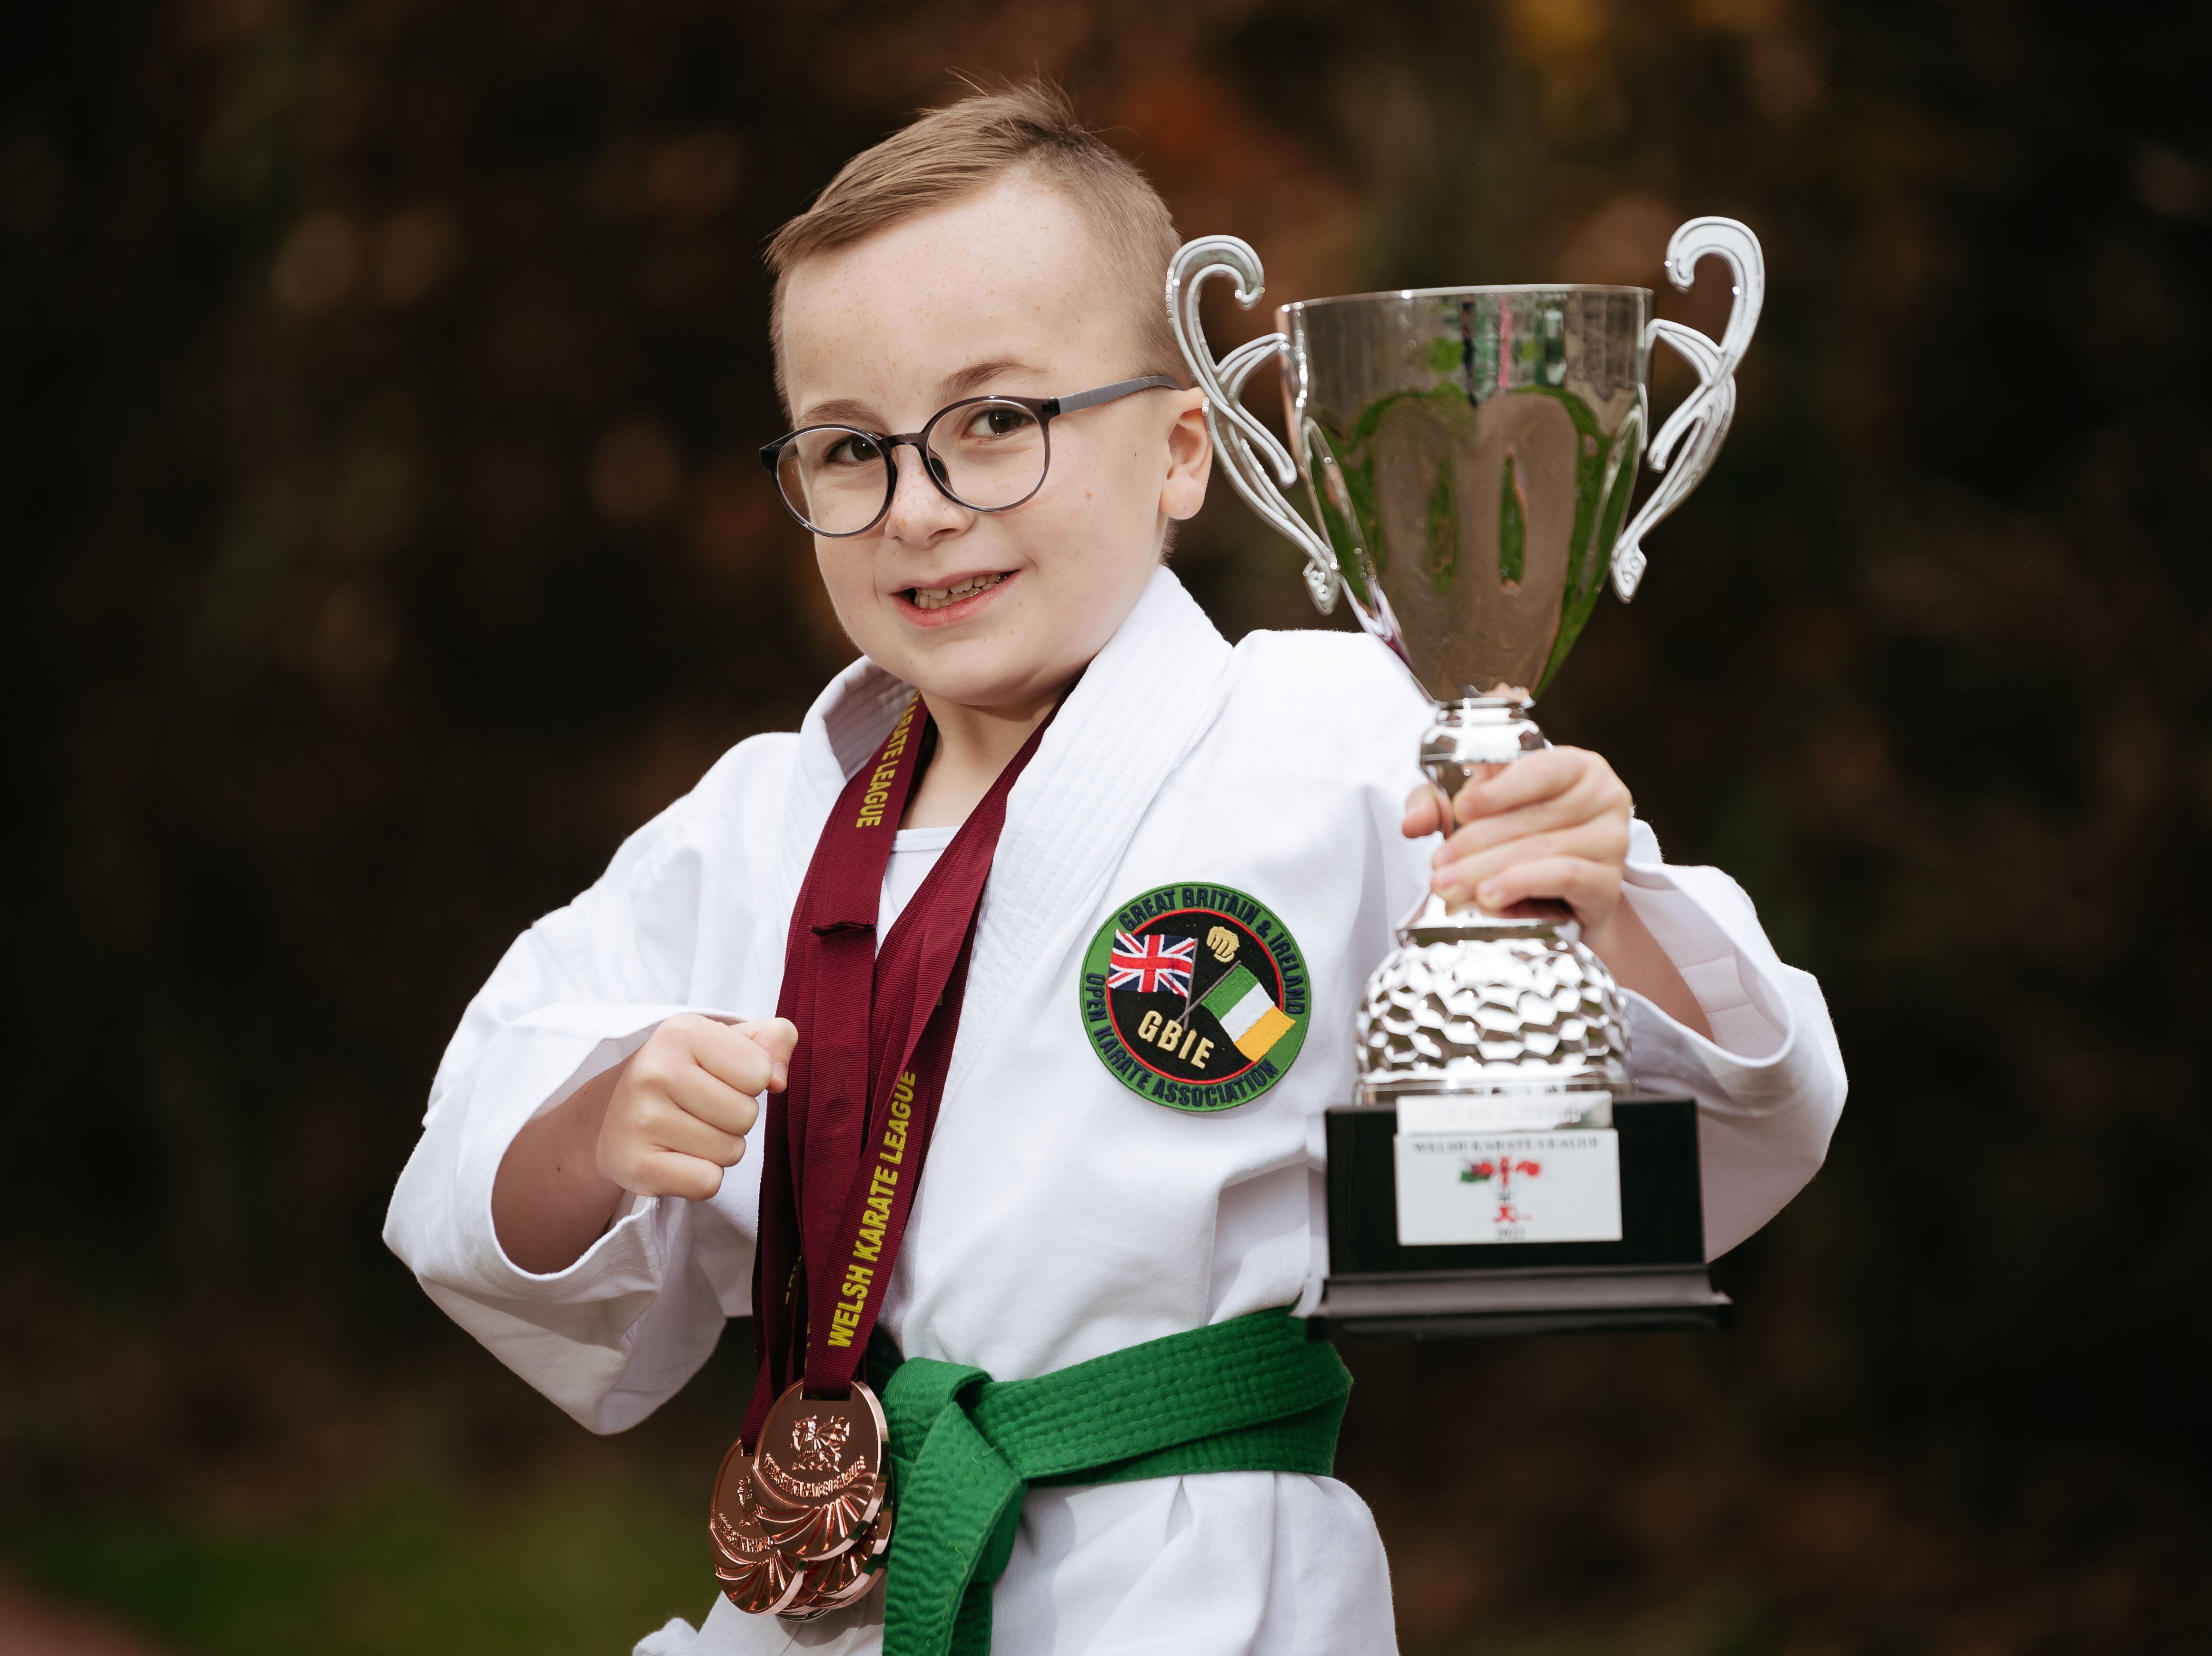 Eight-year-old karate kid Albie destined for glory